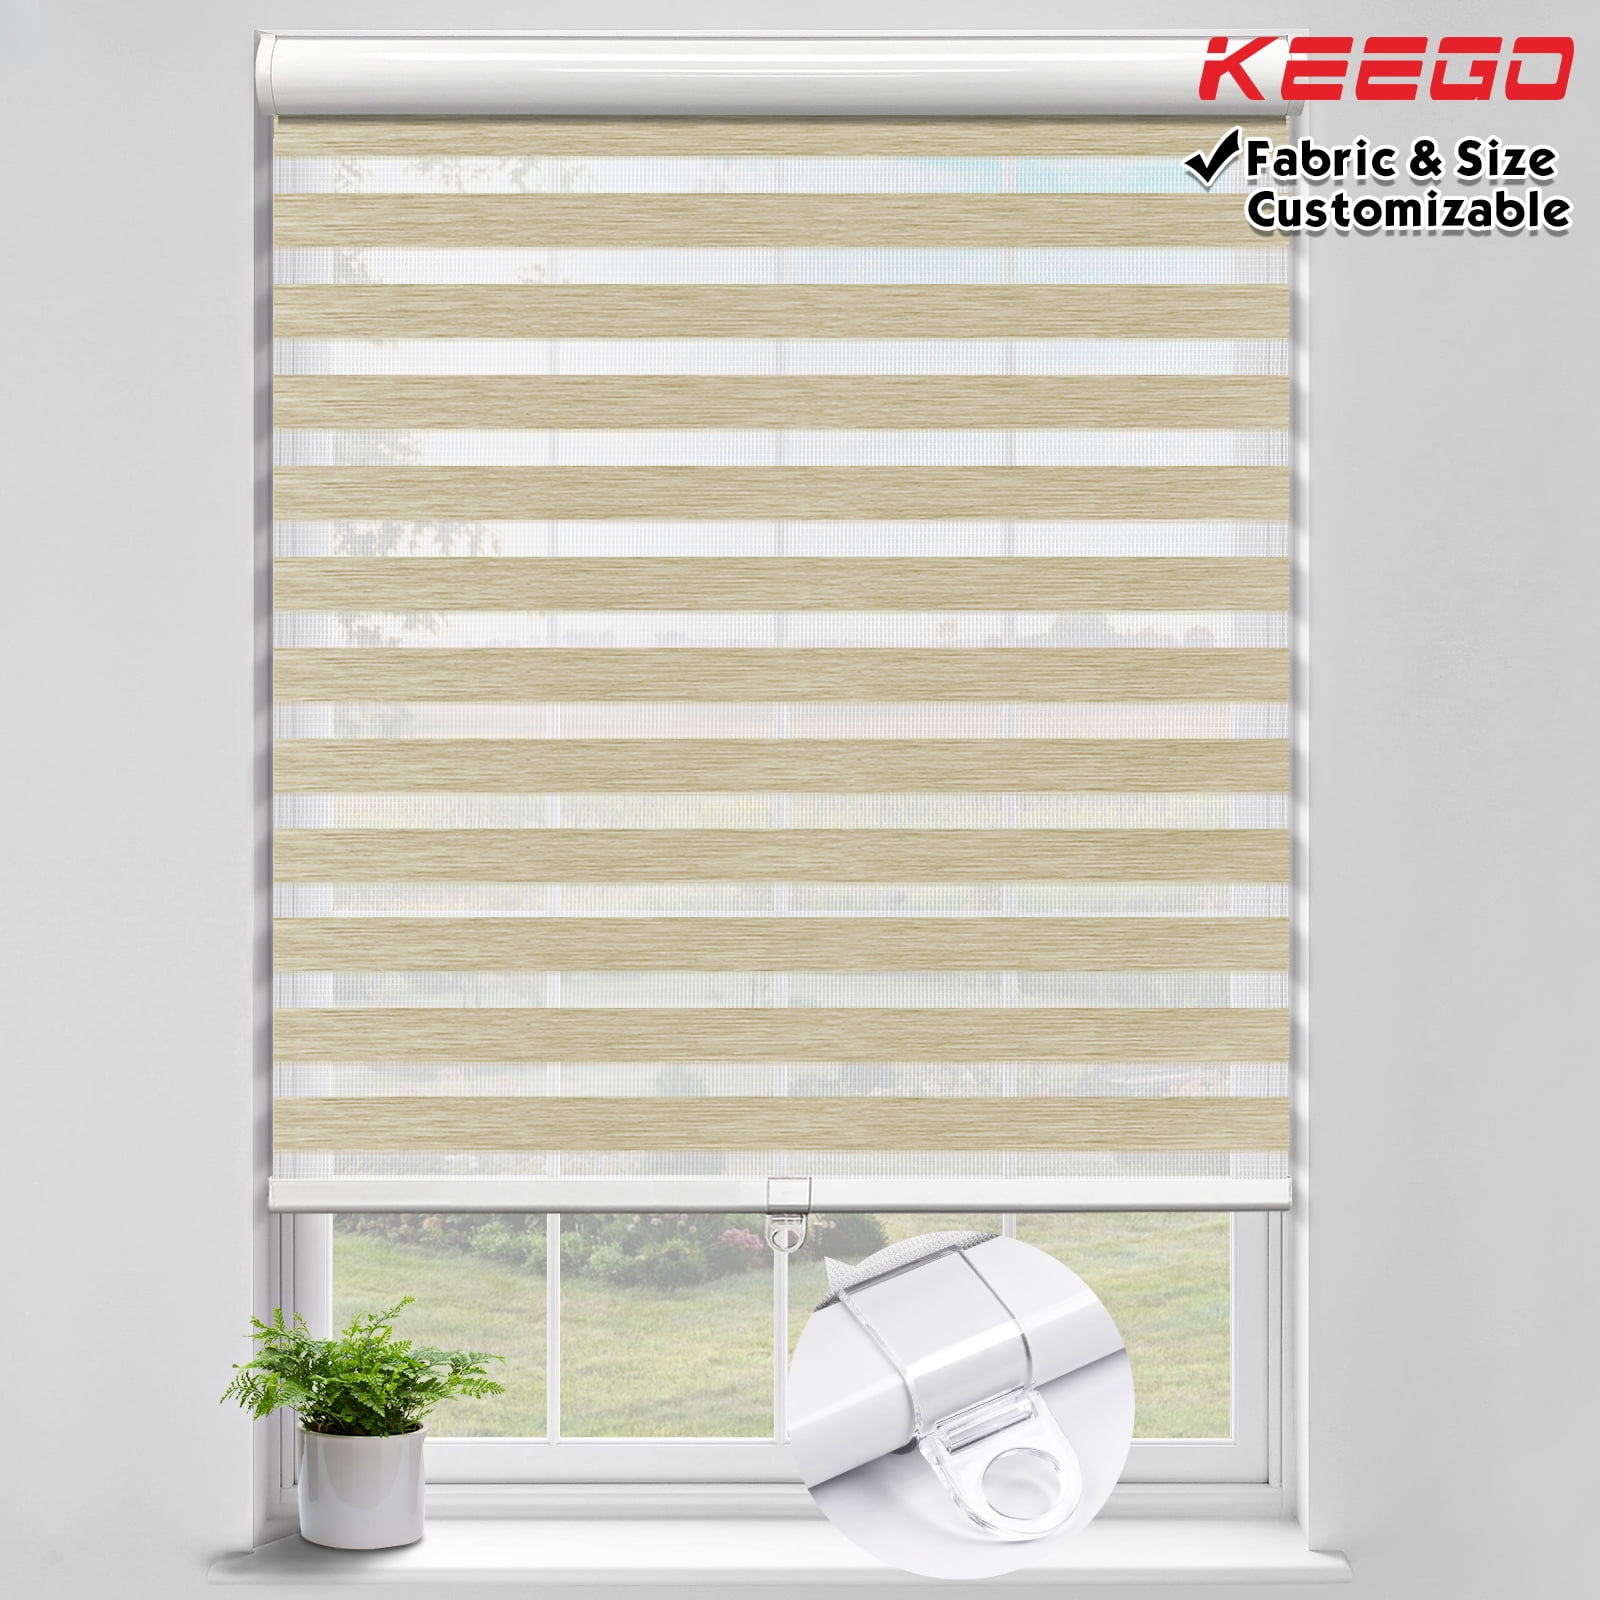 Details about   28" W 72" H Privacy Light Filtering Cordless Cellular Shades Window Blind Beige 